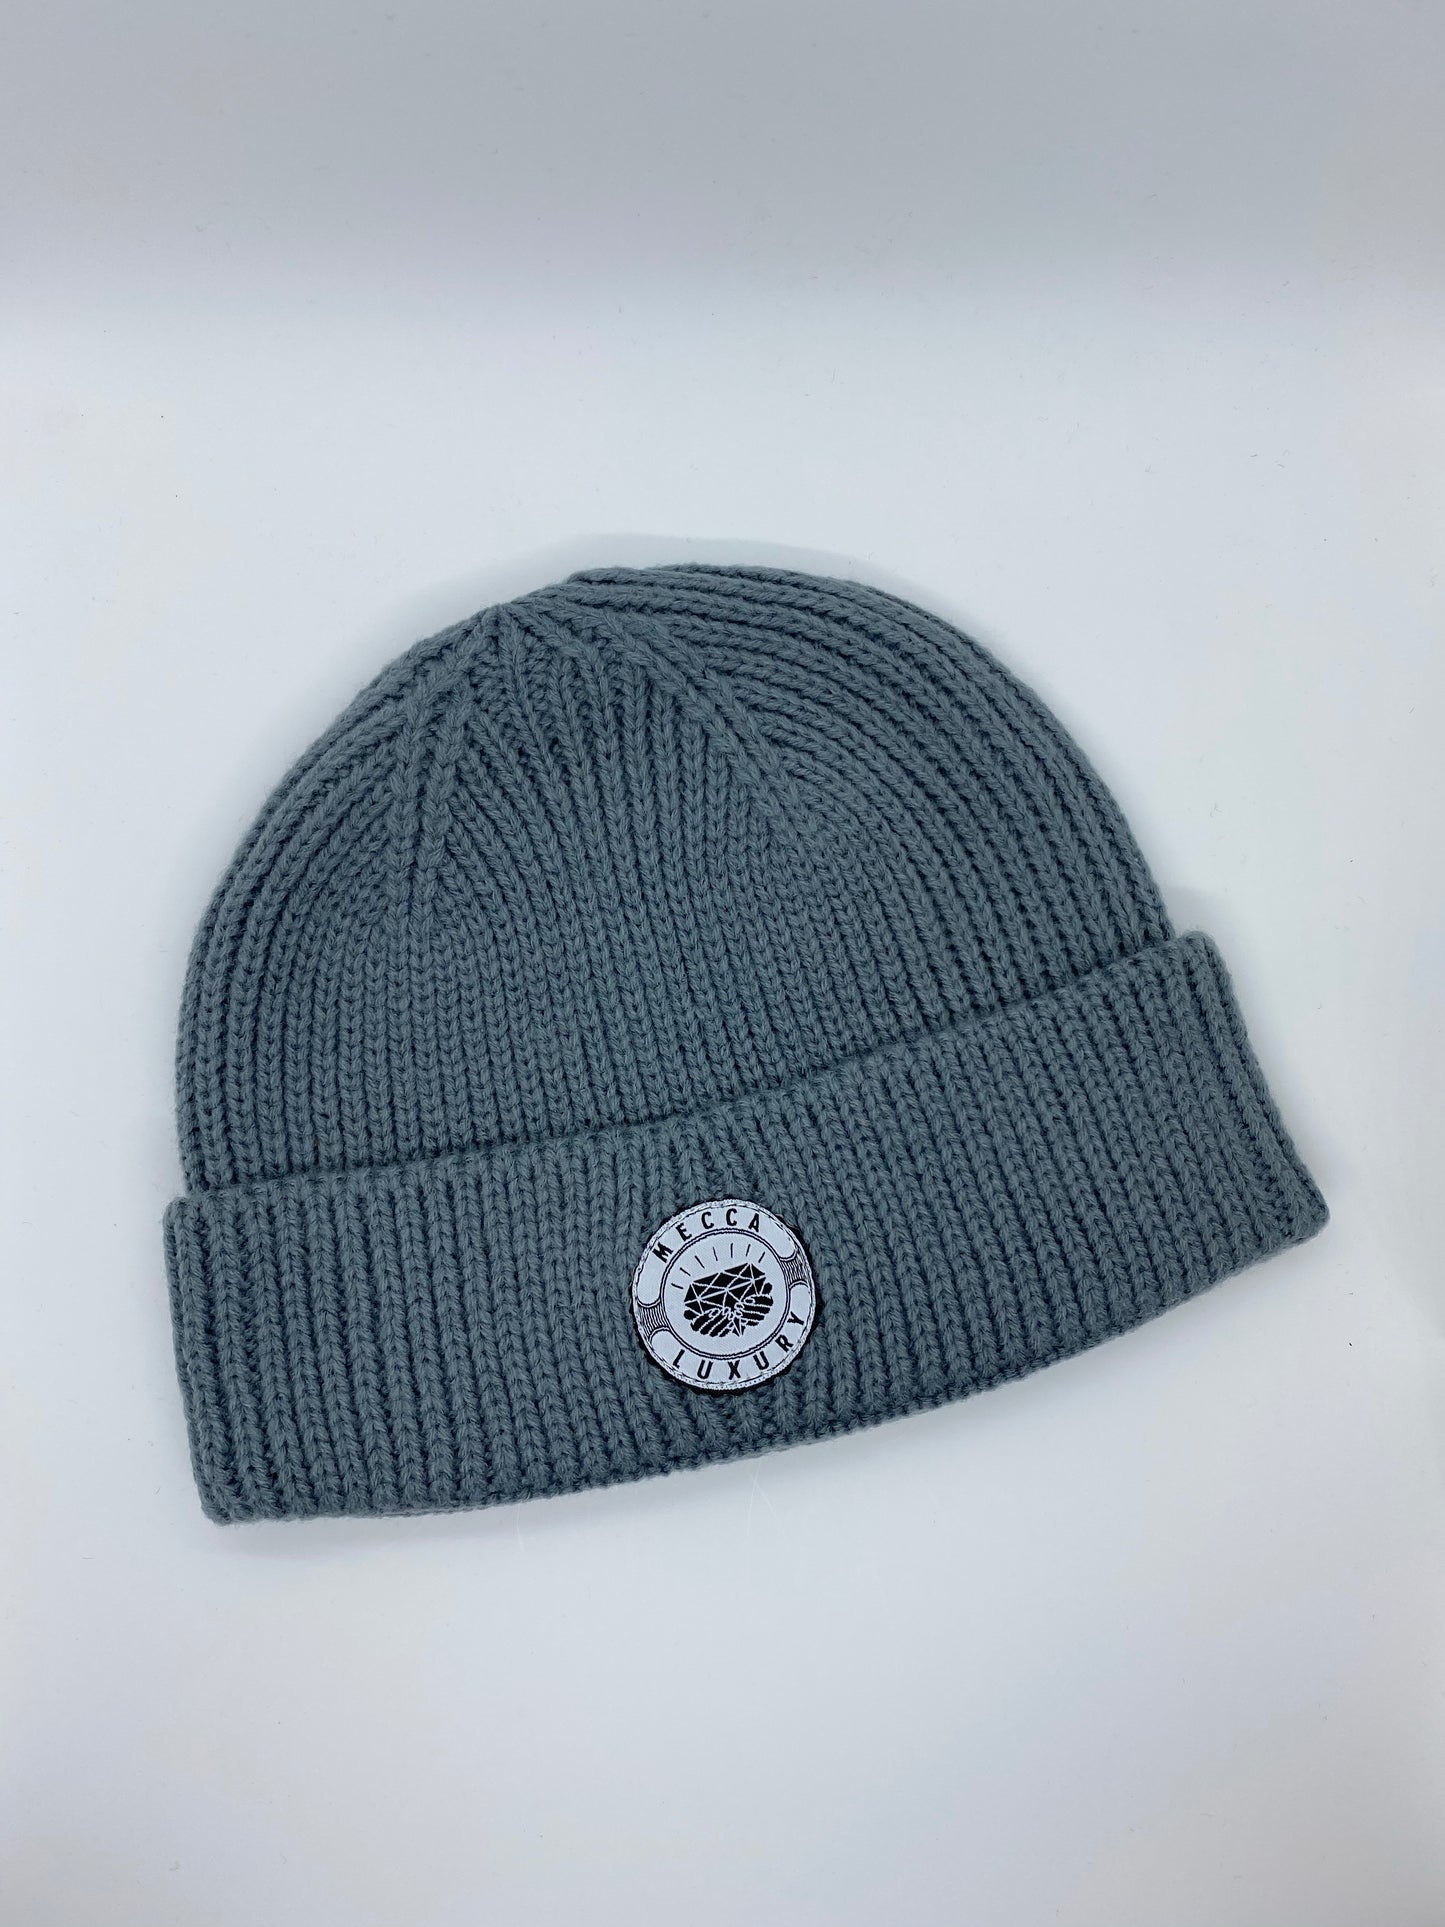 Meccalux Knitted Winter Caps